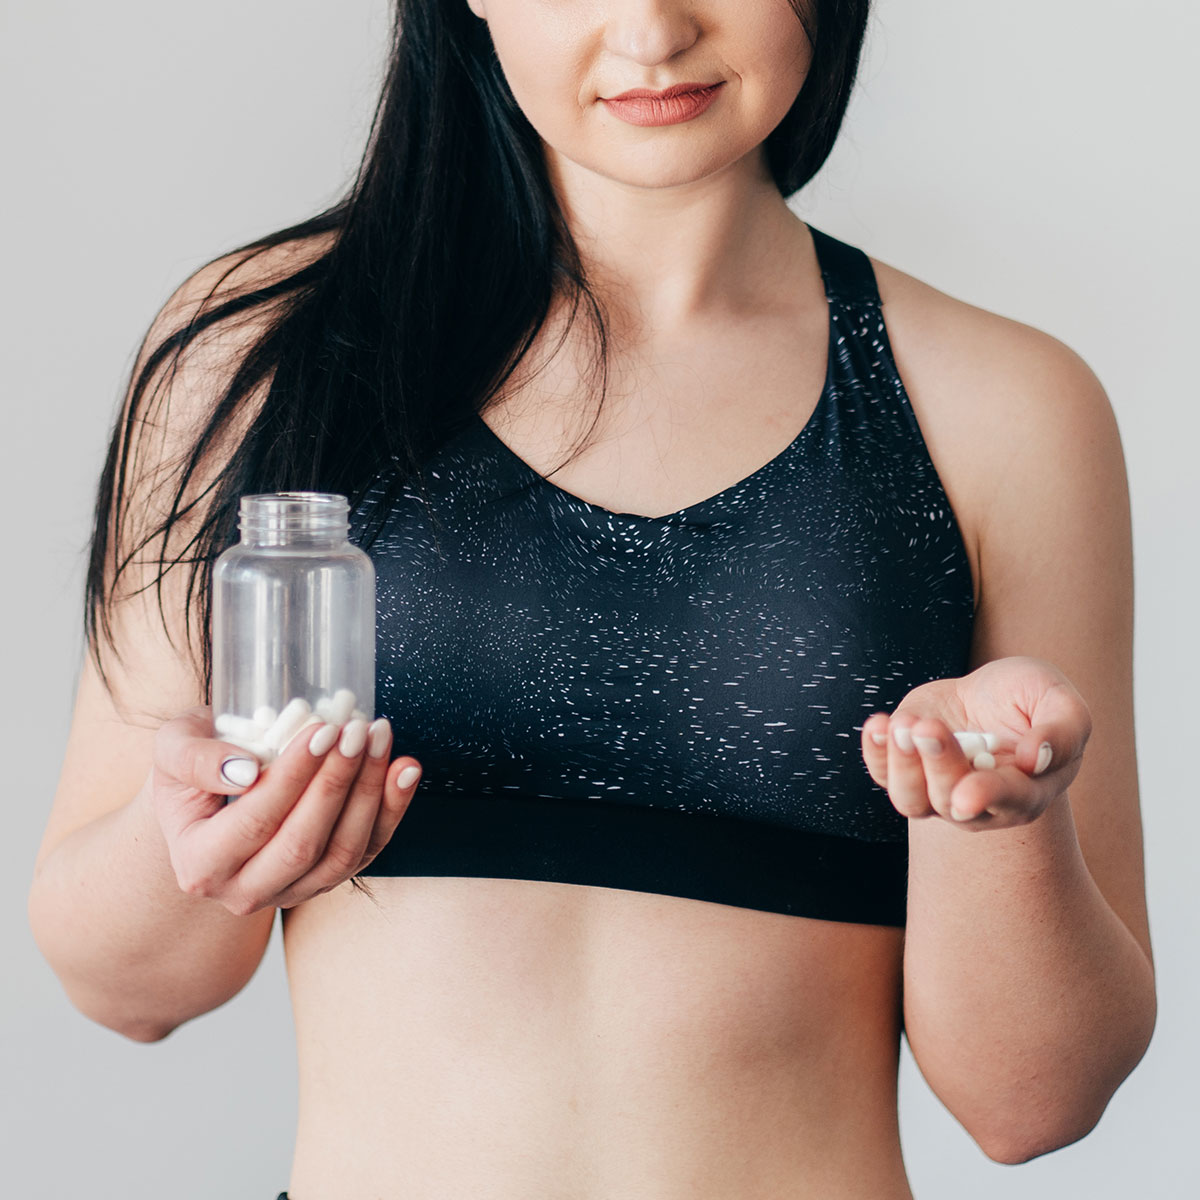 fit woman taking supplements sports bra holding medicine